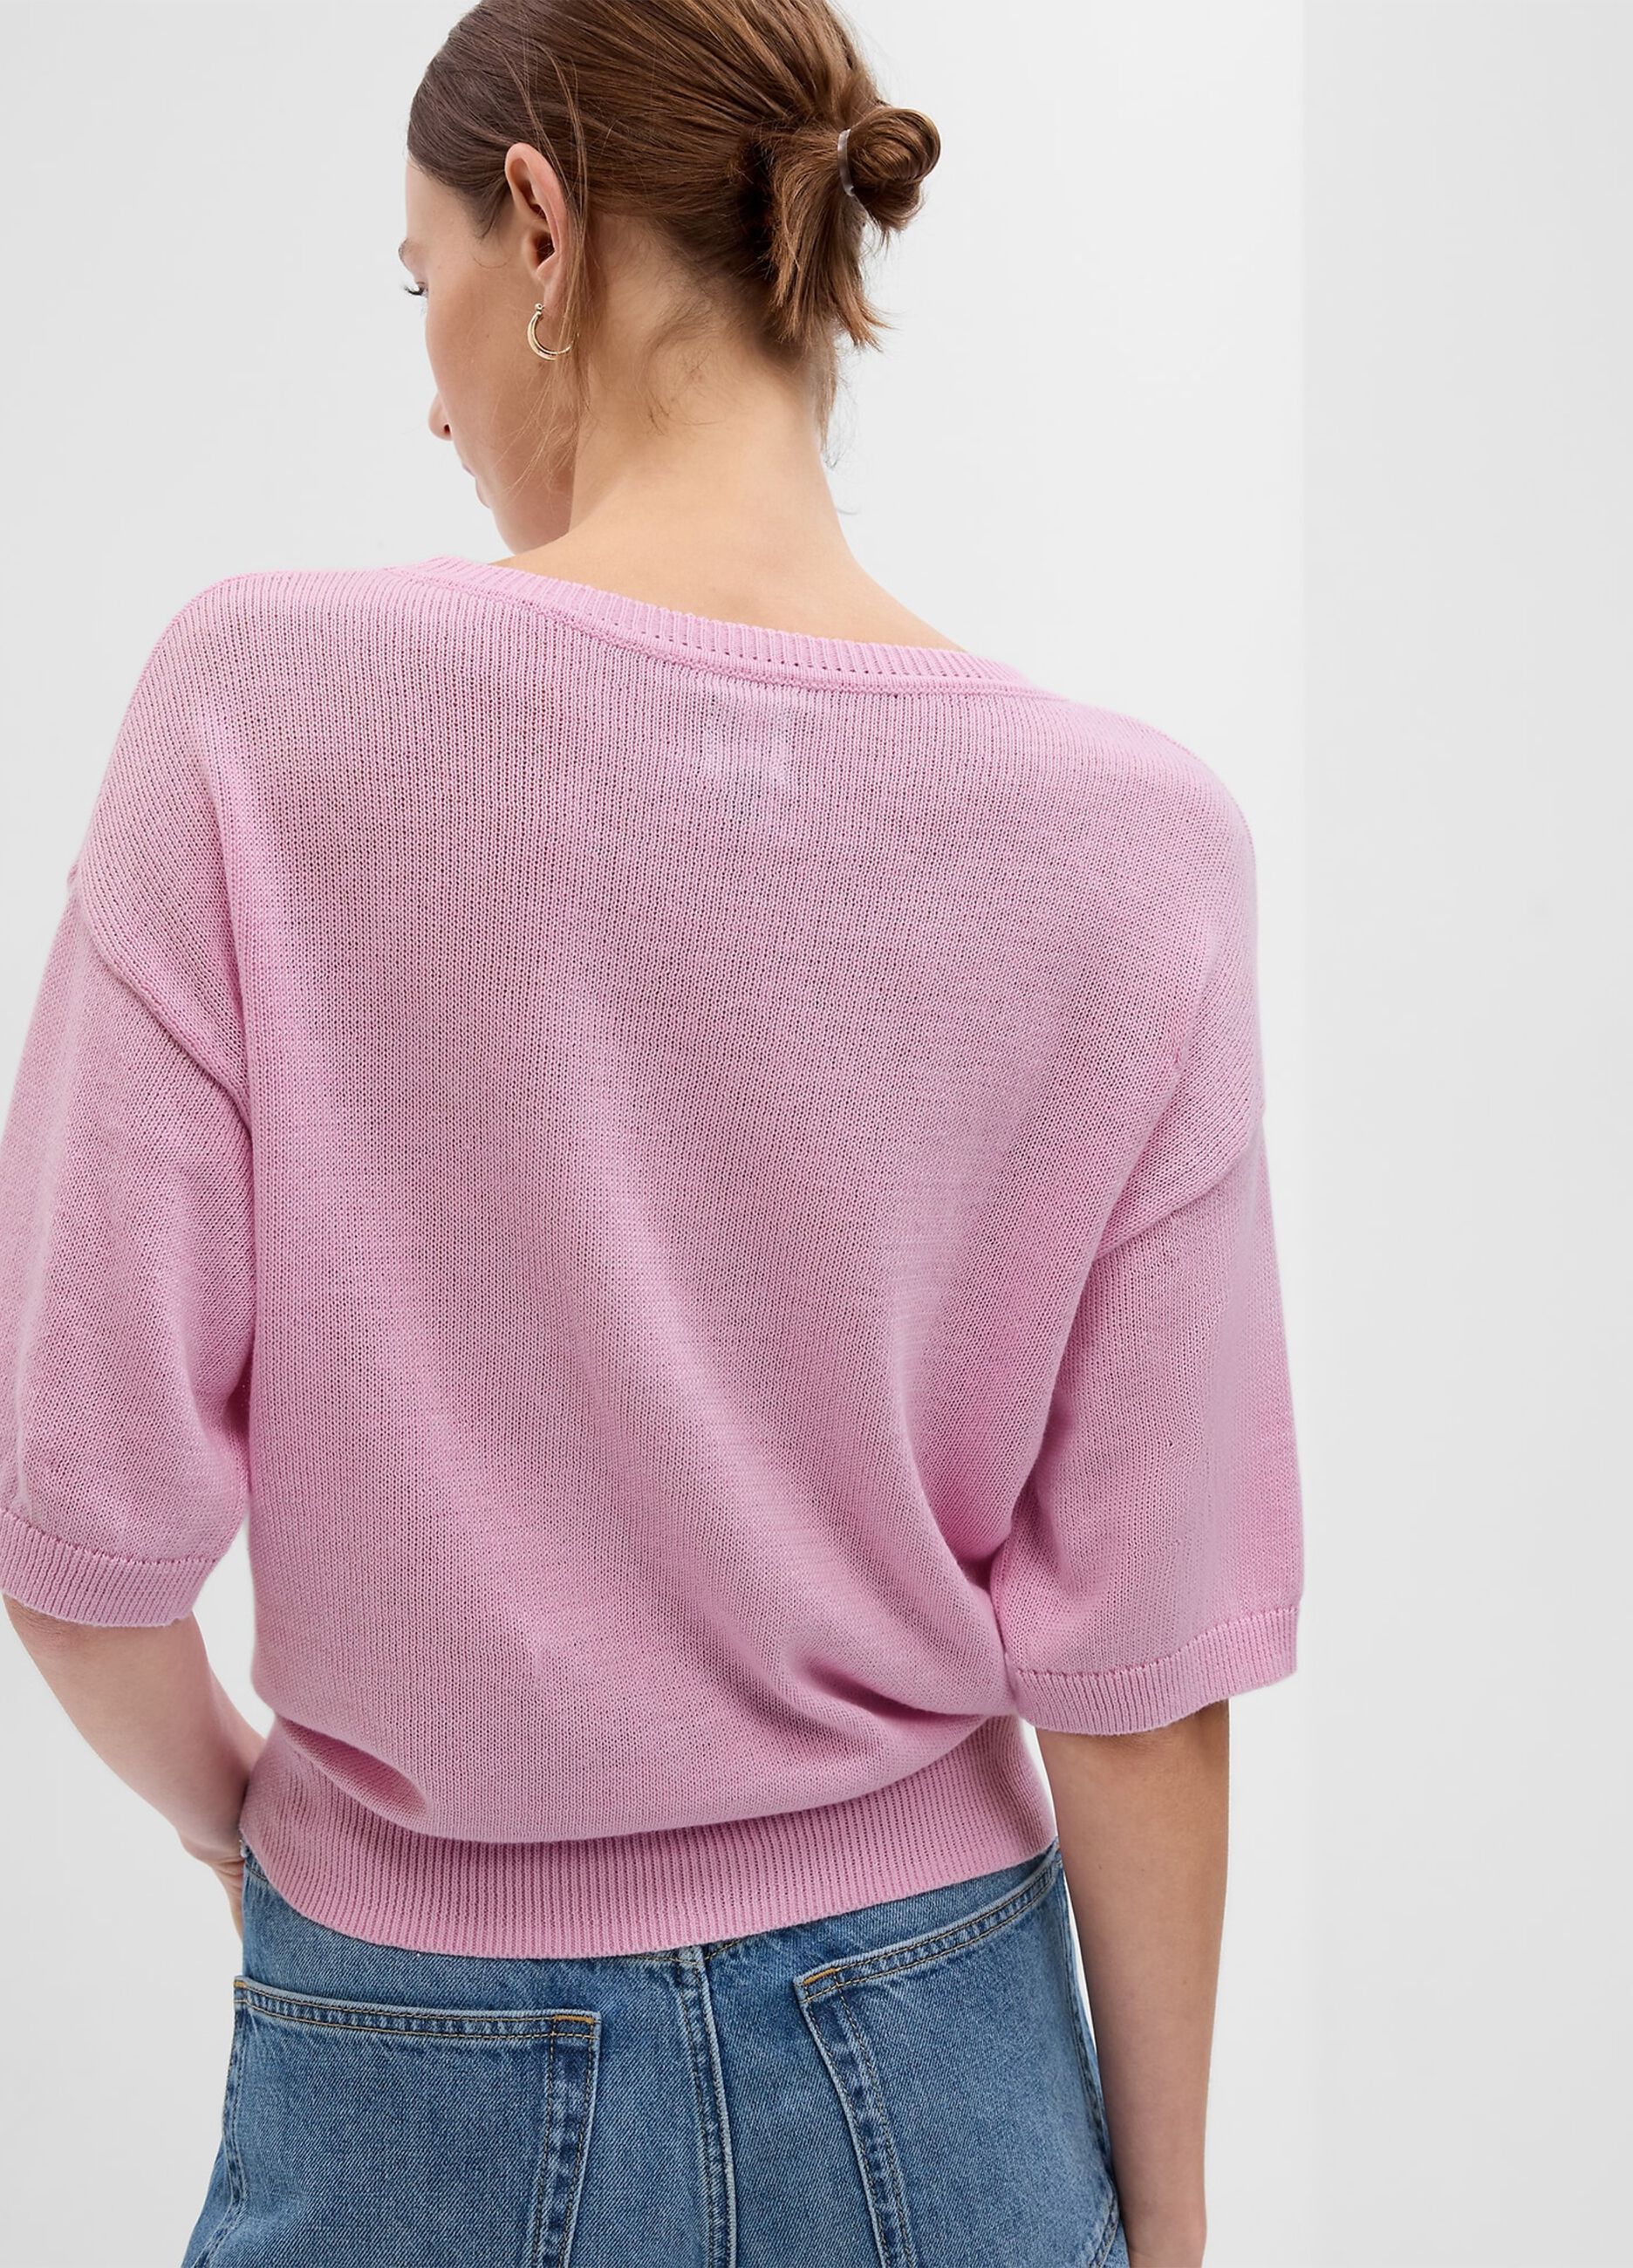 Elbow-length pullover in linen and cotton_1